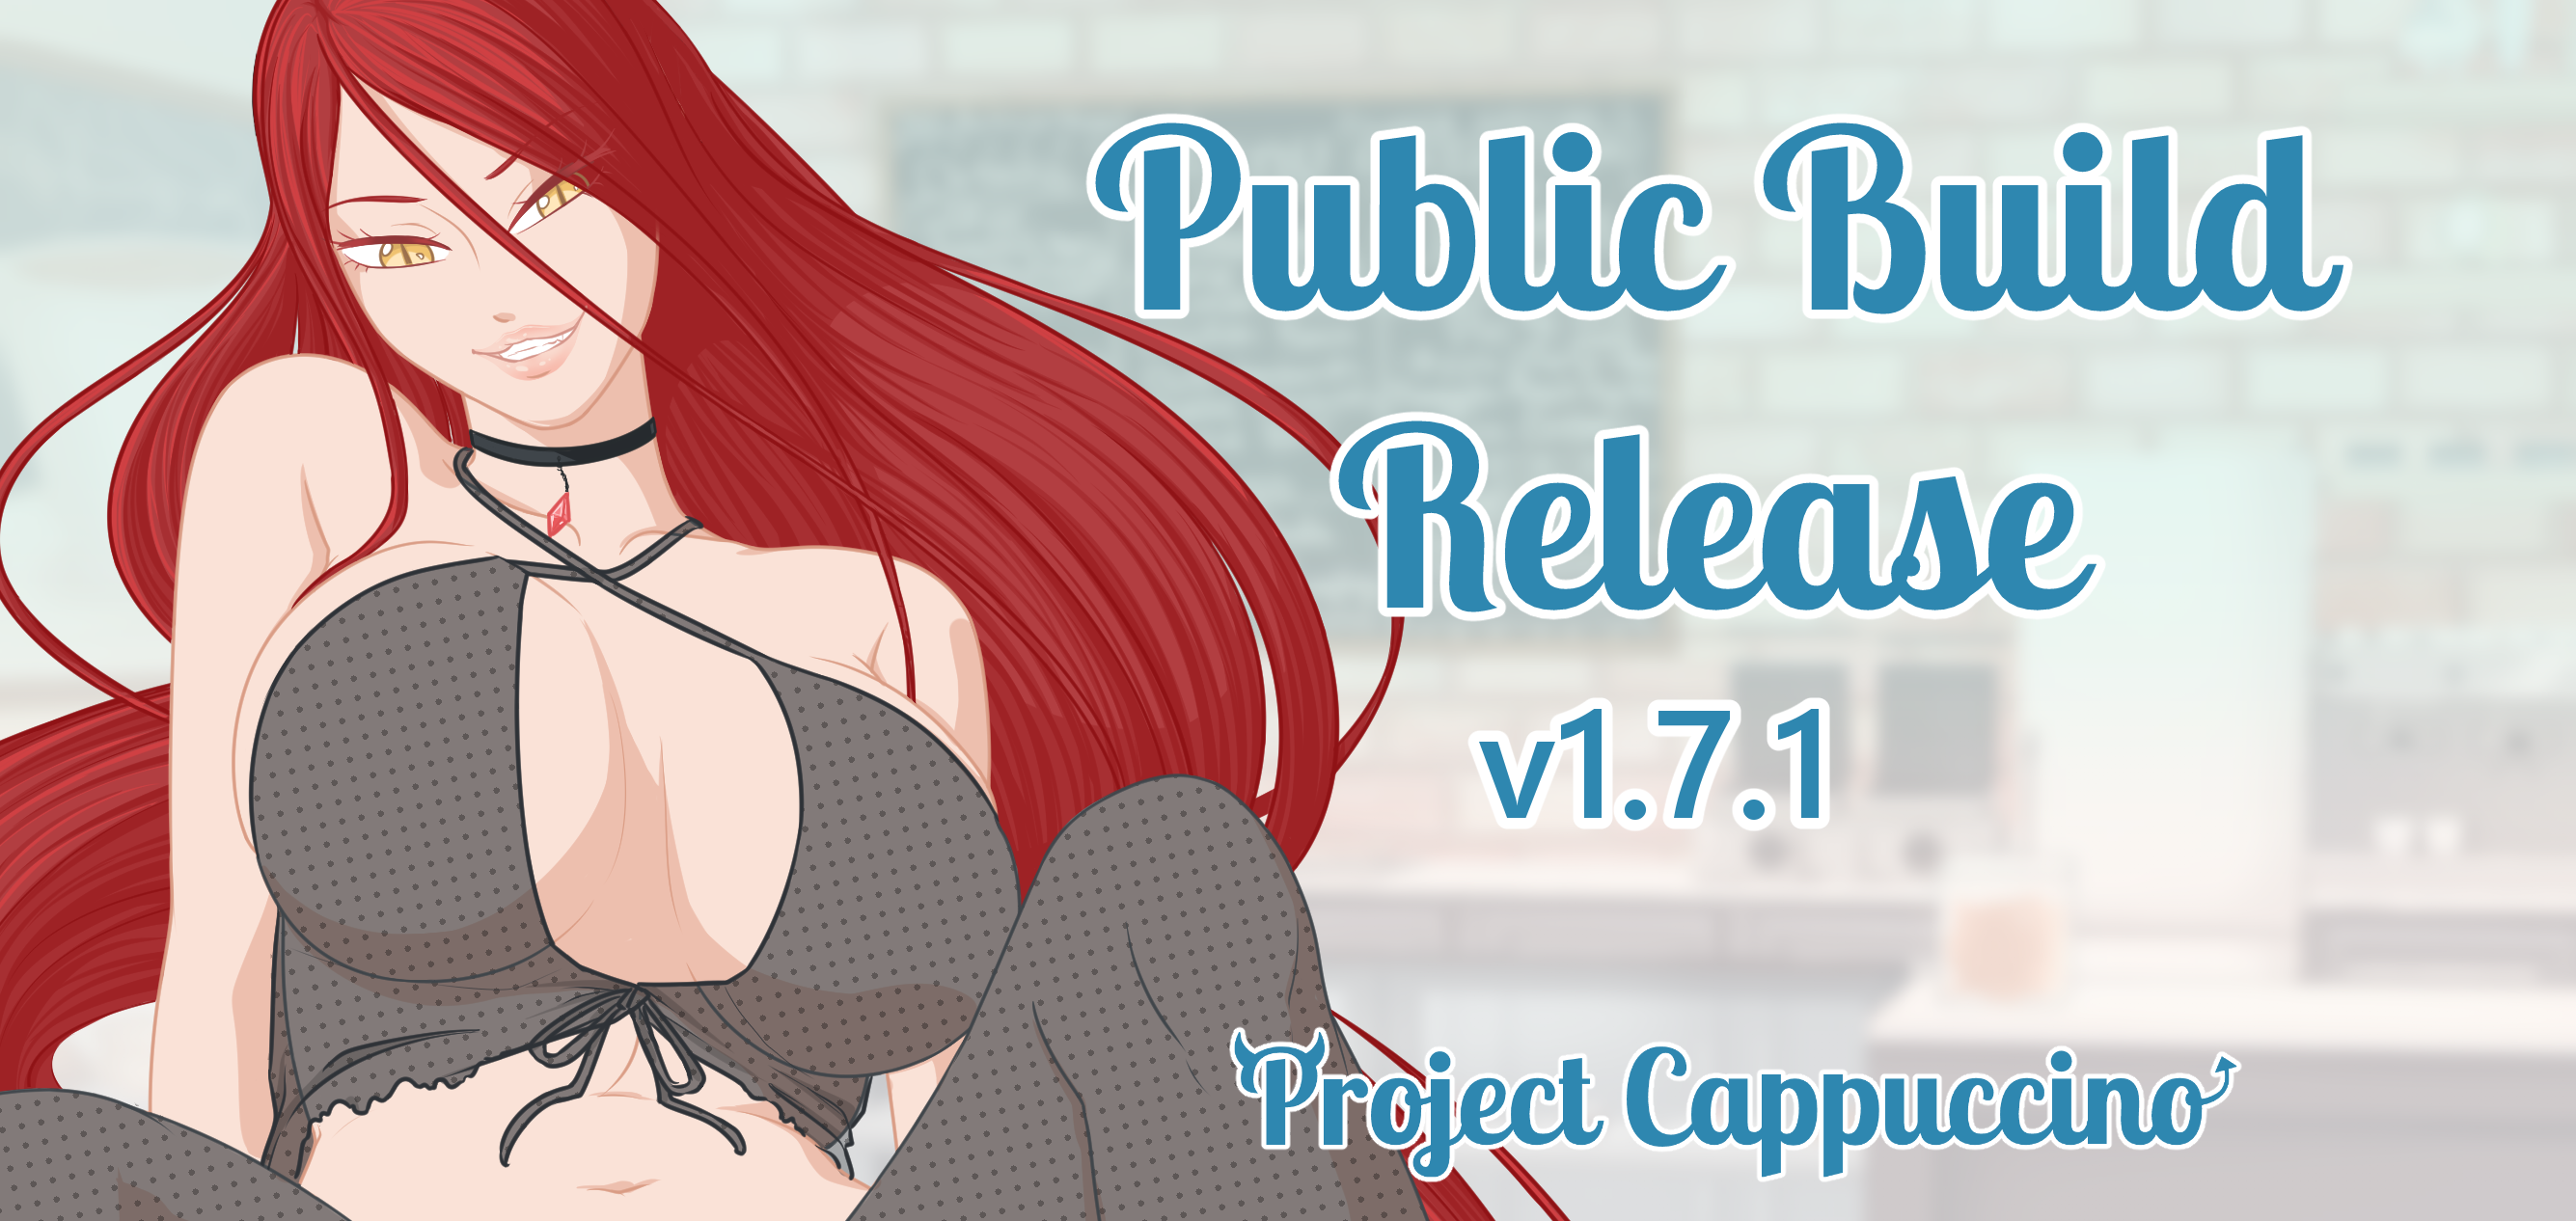 New Project Cappuccino  public build is now available 